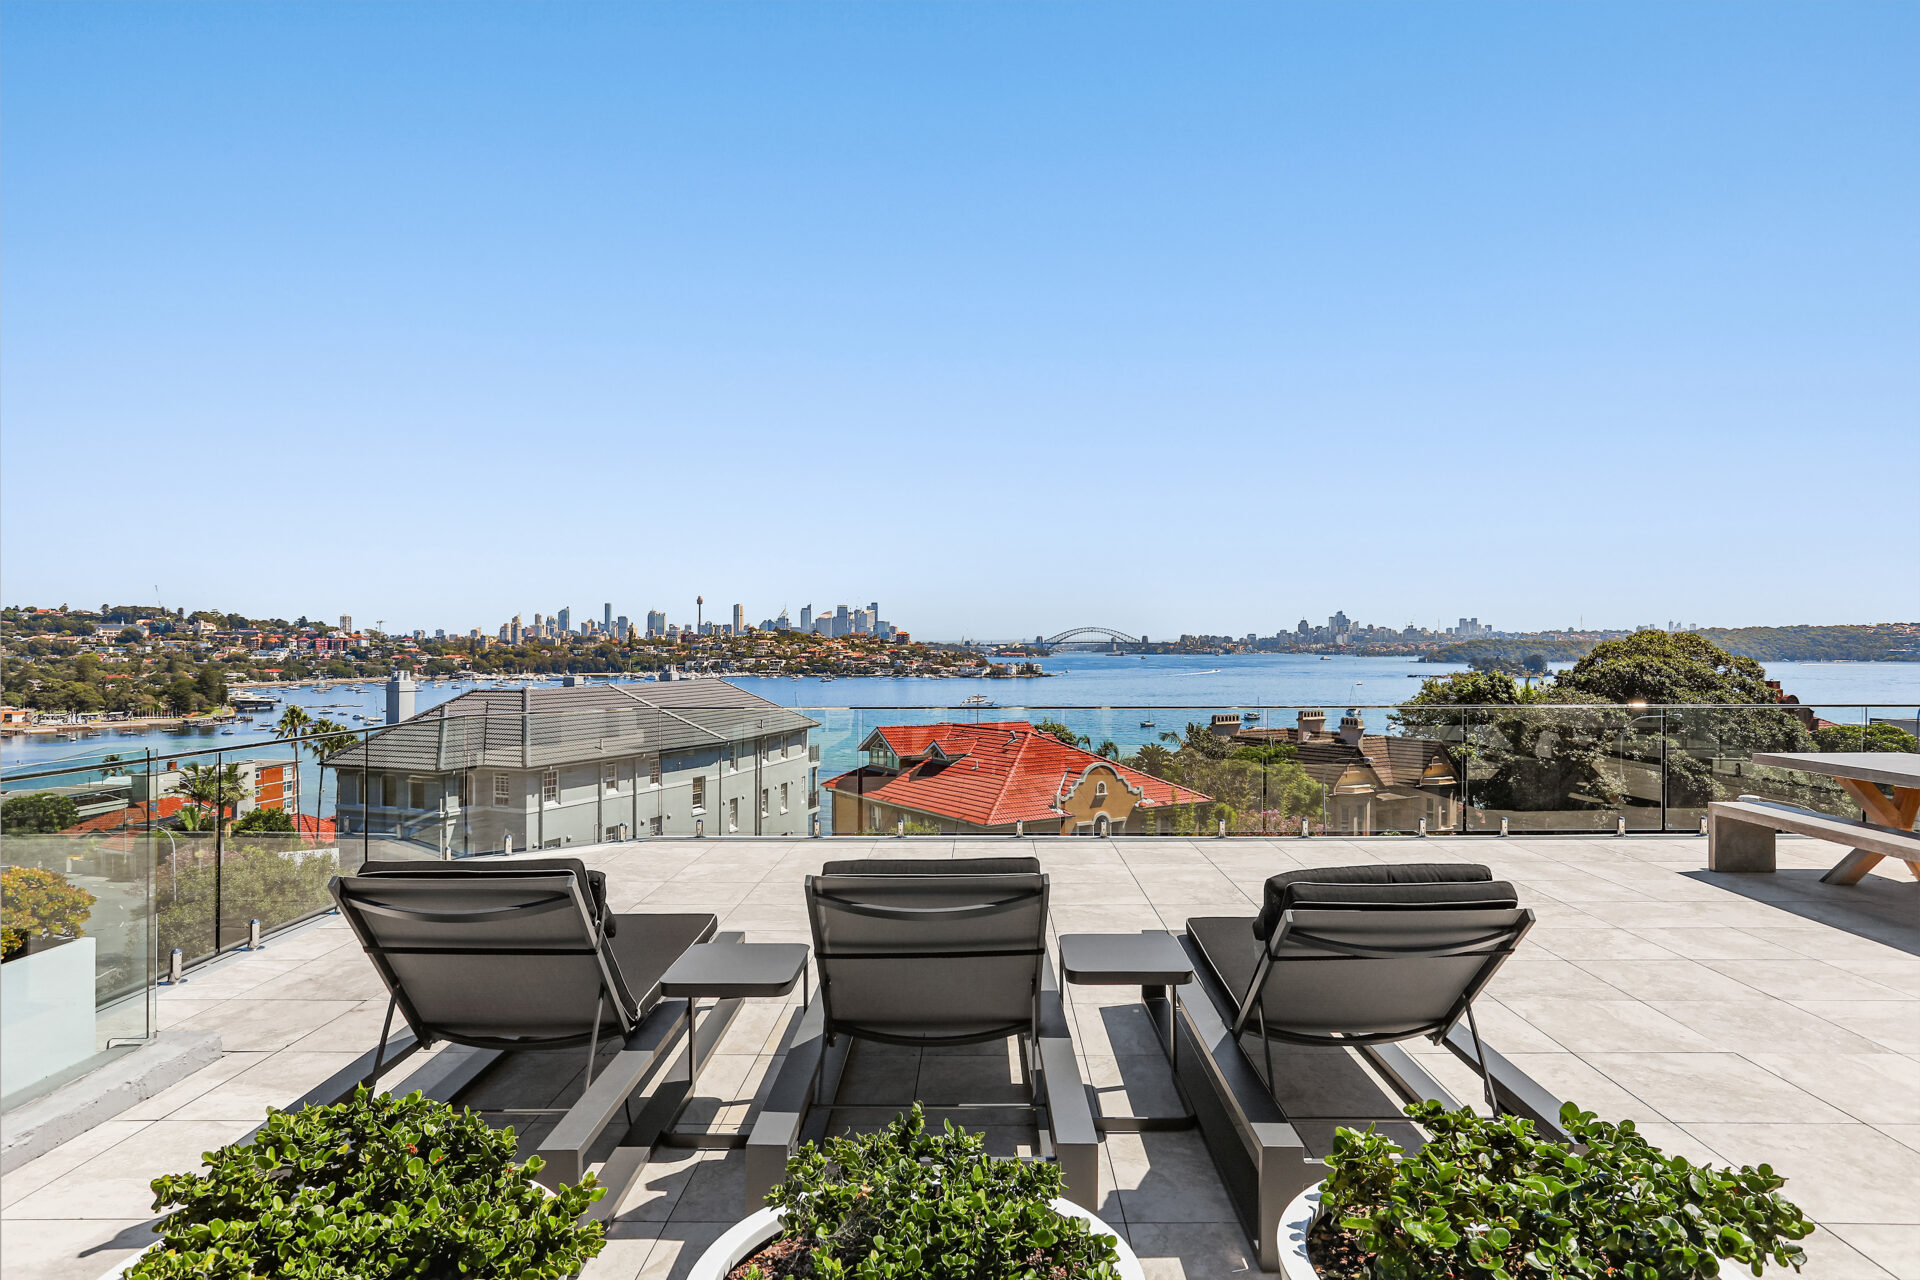 Million dollar penthouse with sunbeds over looking Sydney Harbour